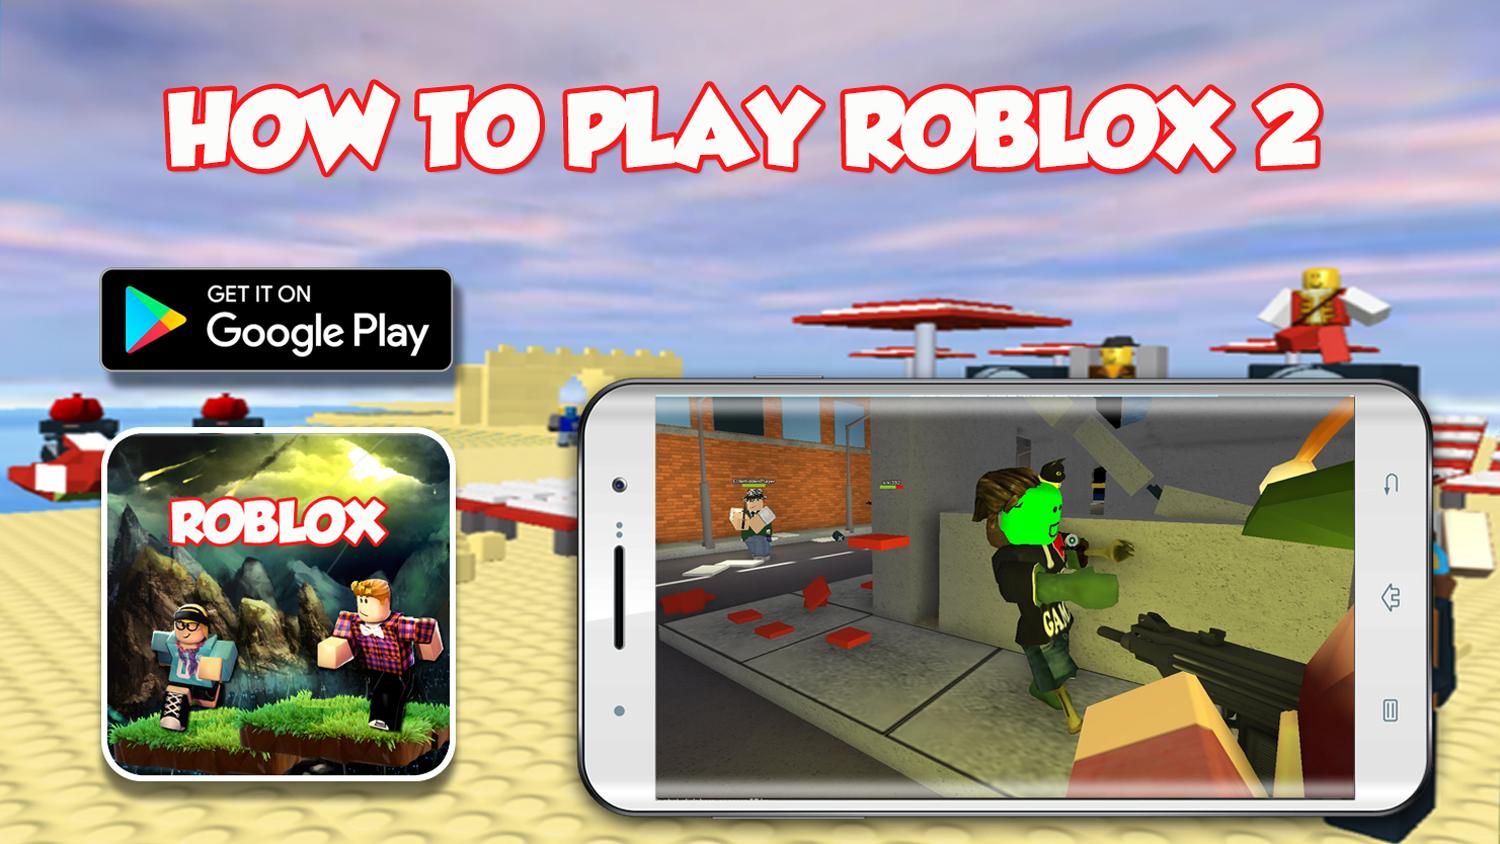 Guide For Roblox 2 Free For Android Apk Download - roblox game on google play